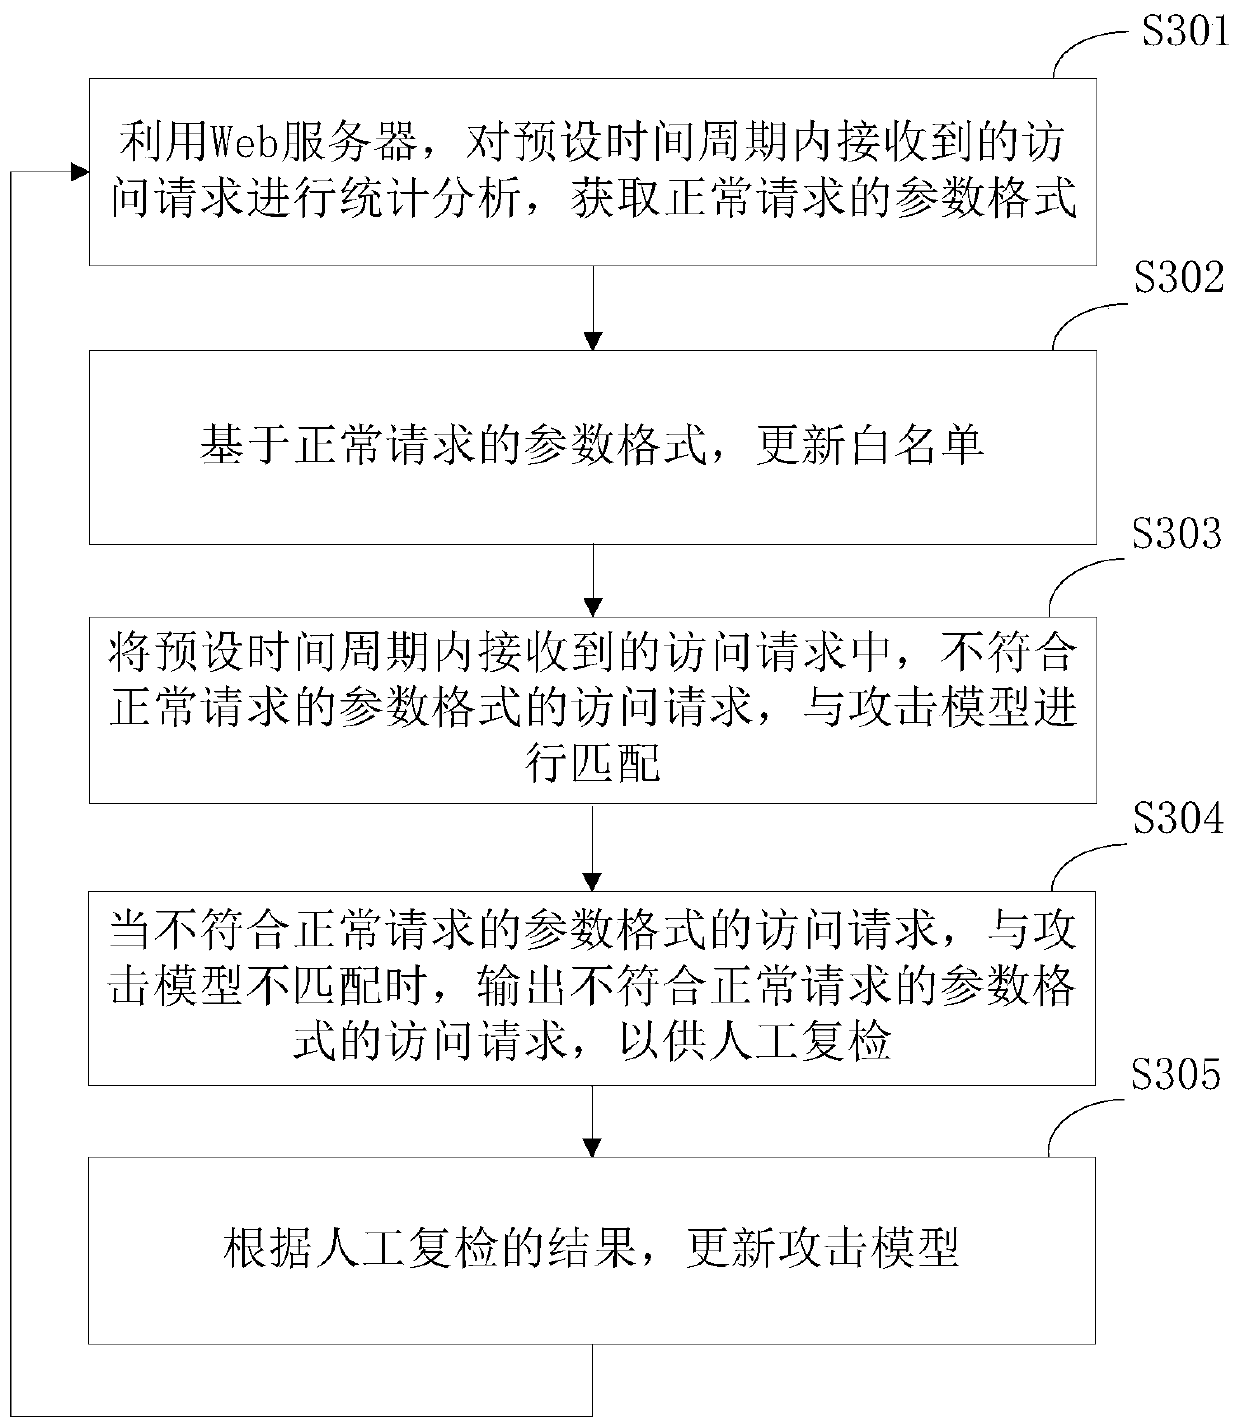 Web application security protection method and a Web application firewall system